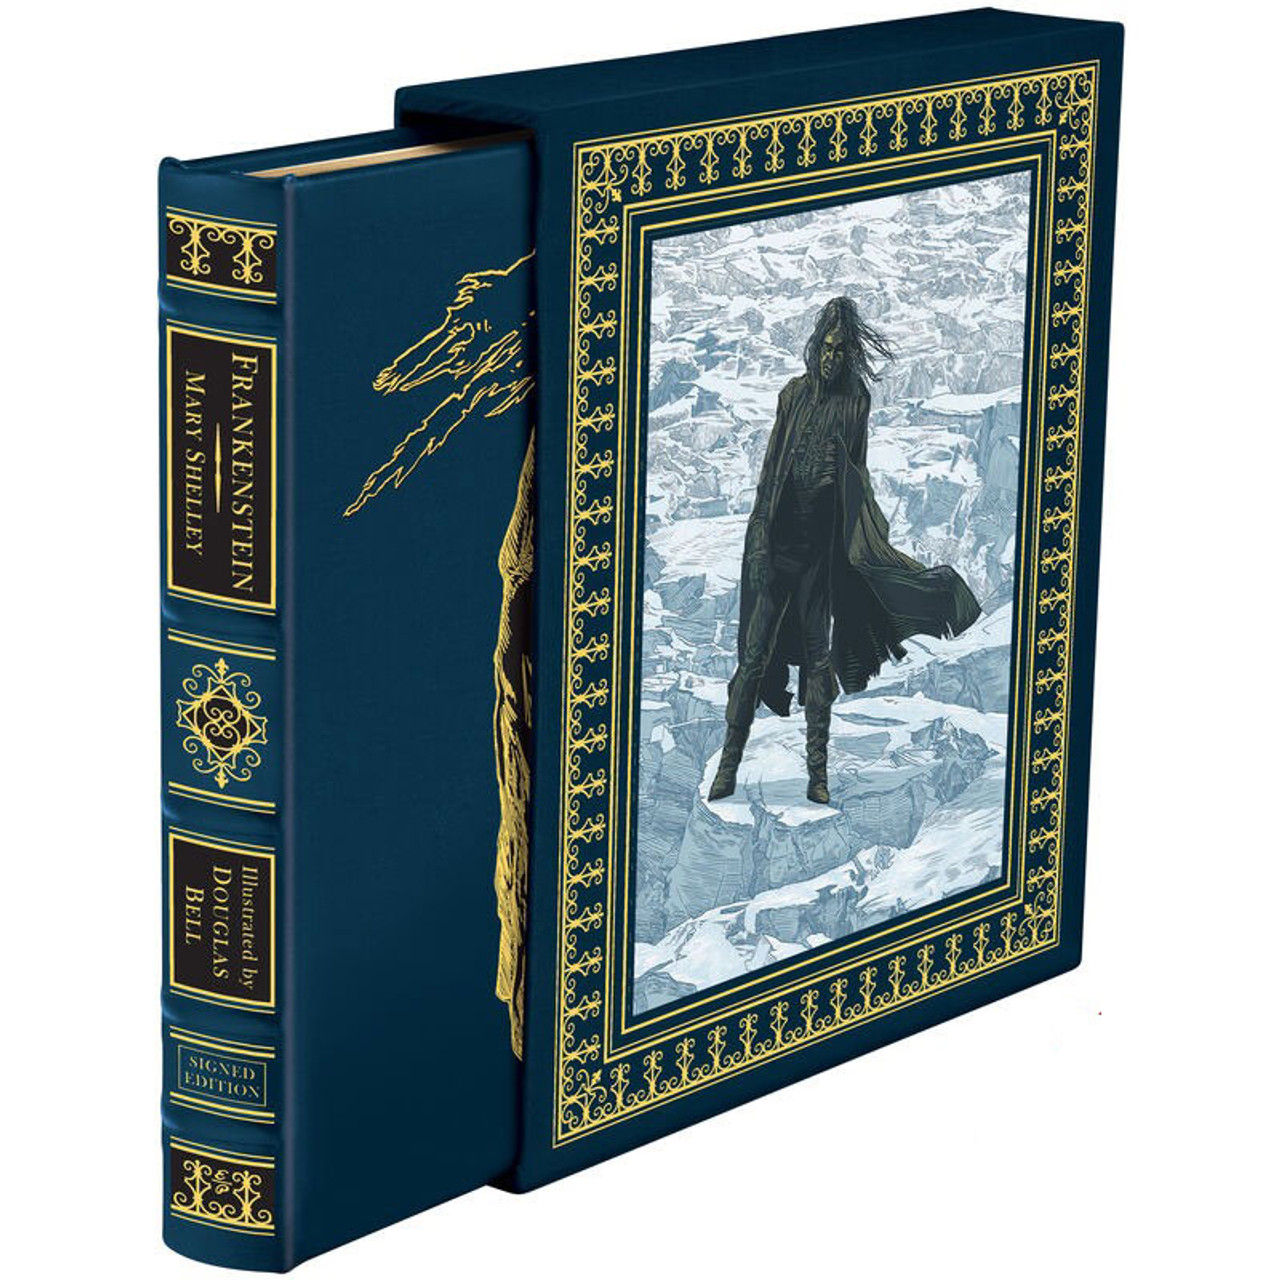 Mary Shelley "Frankenstein" Deluxe Signed Limited Artist Edition, Leather Bound Collector's Edition of 1,200 w/COA [Sealed]